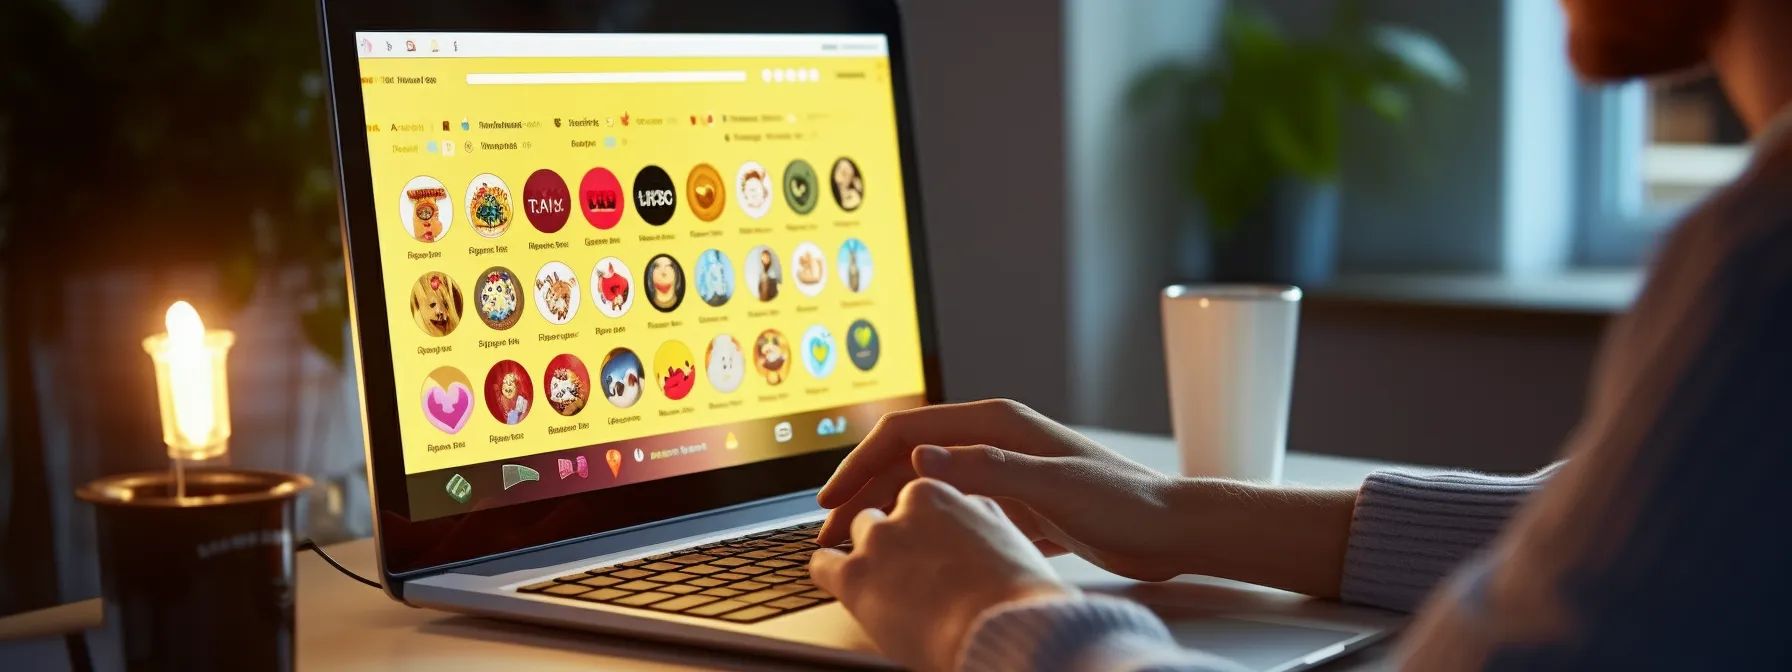 a person selecting and arranging emojis on a computer screen for crafting creative titles.